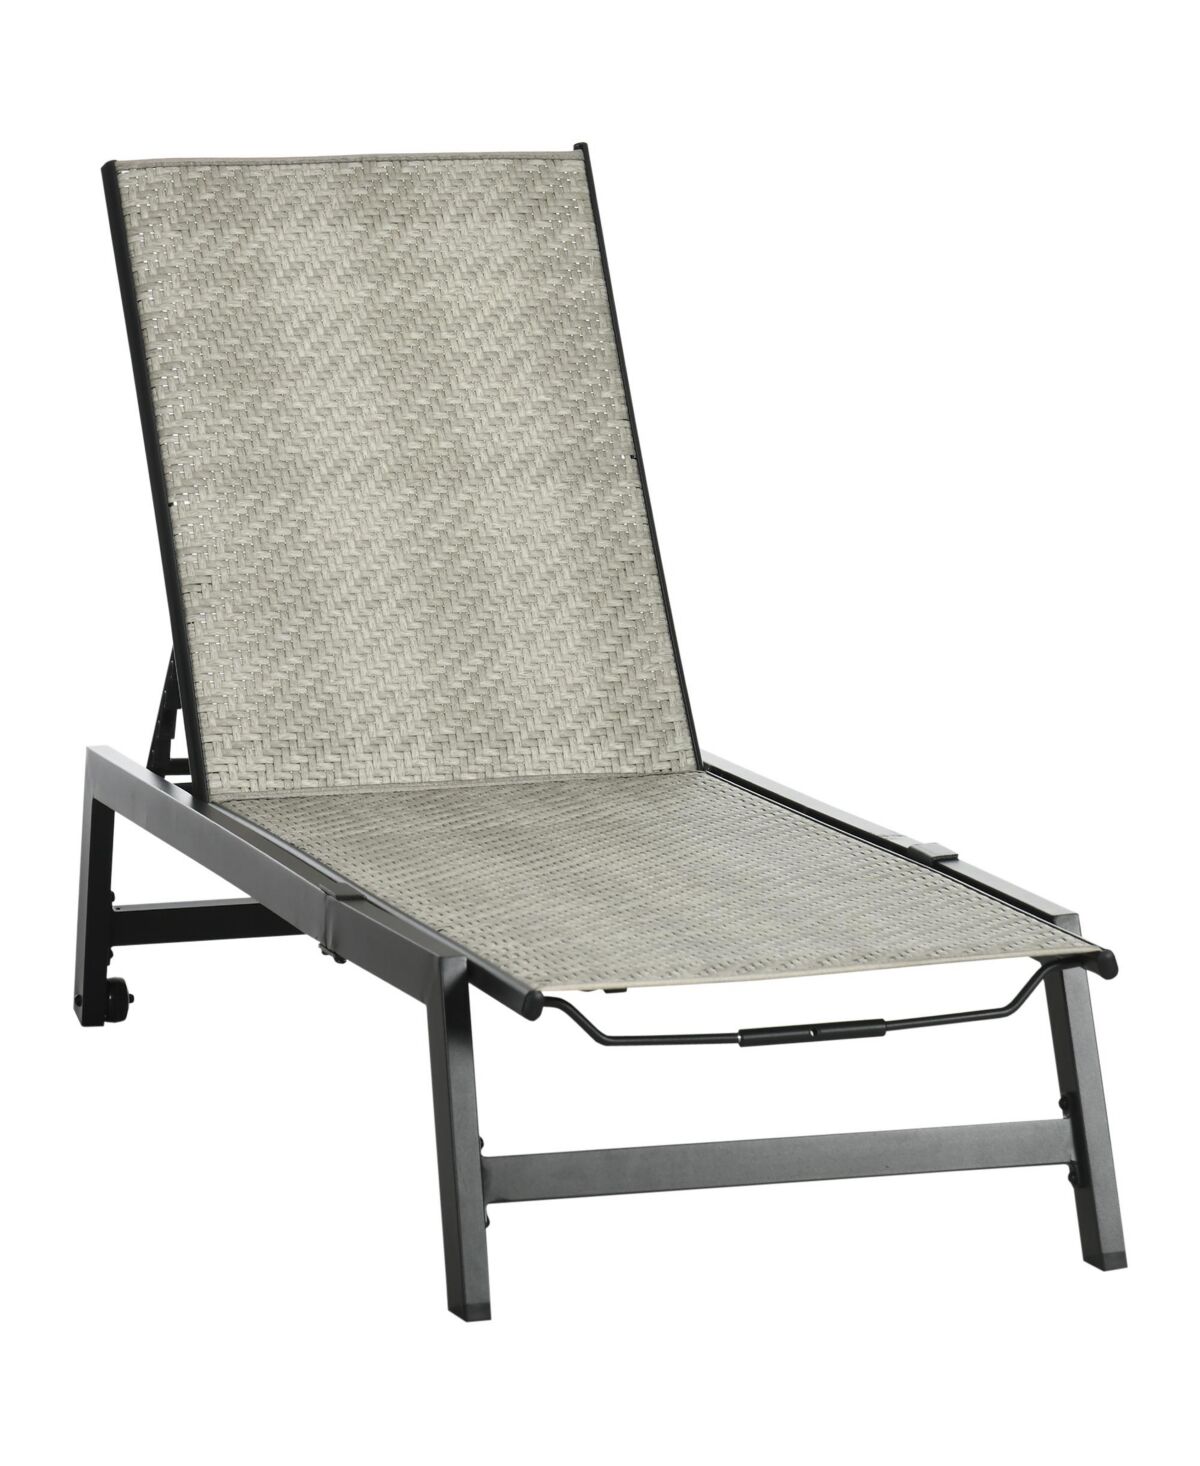 Outsunny Outdoor Chaise Lounge Chair, Waterproof Rattan Wicker Pool Furniture with 5-Position Reclining Adjustable Backrest & Wheels for Beach, Tannin